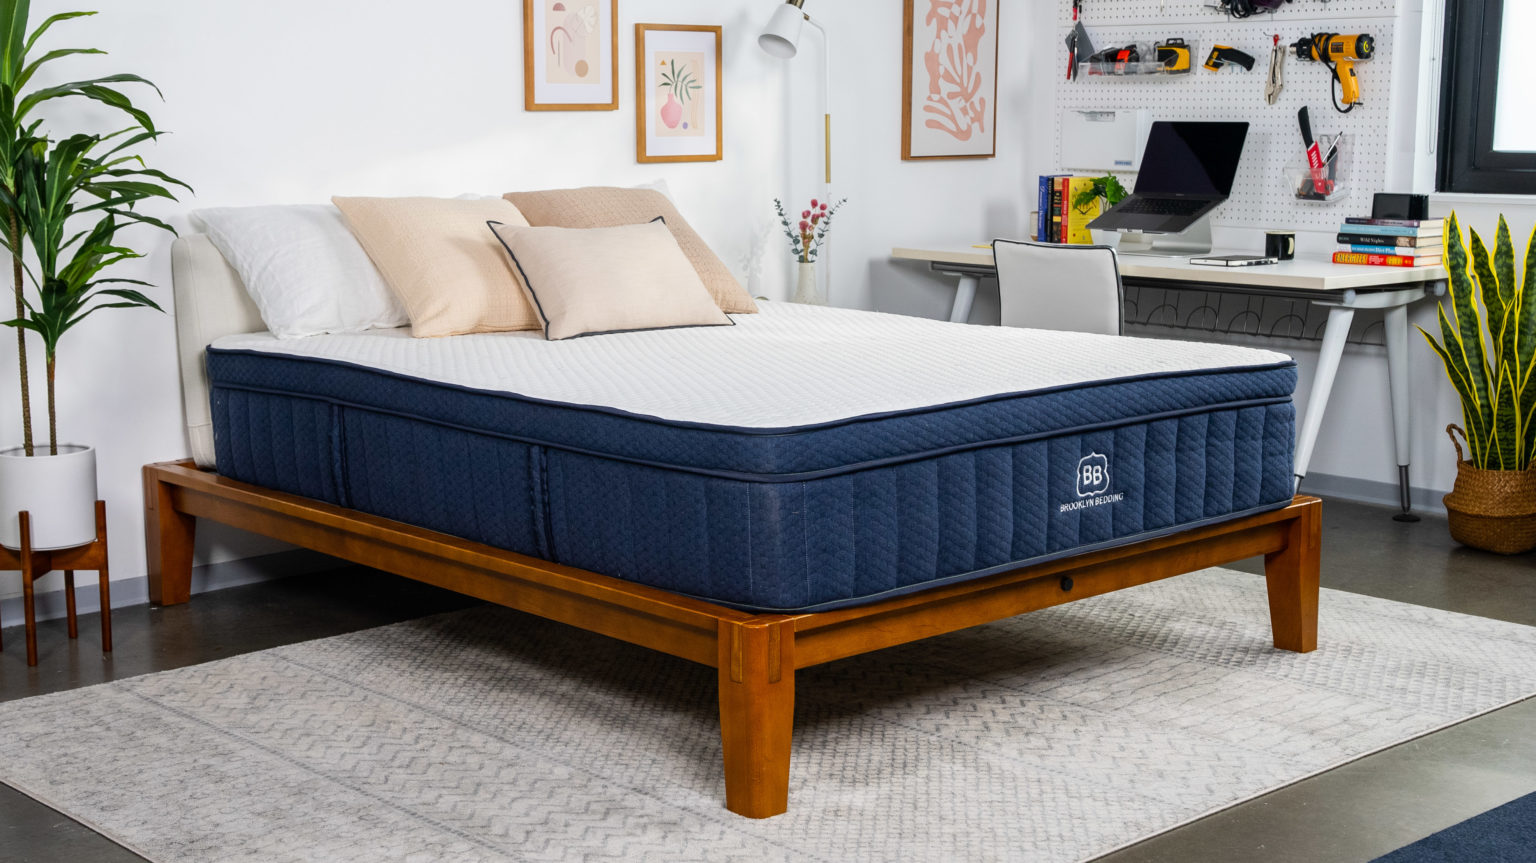 5 Main Things You Should Know Before Buying A Mattress 17